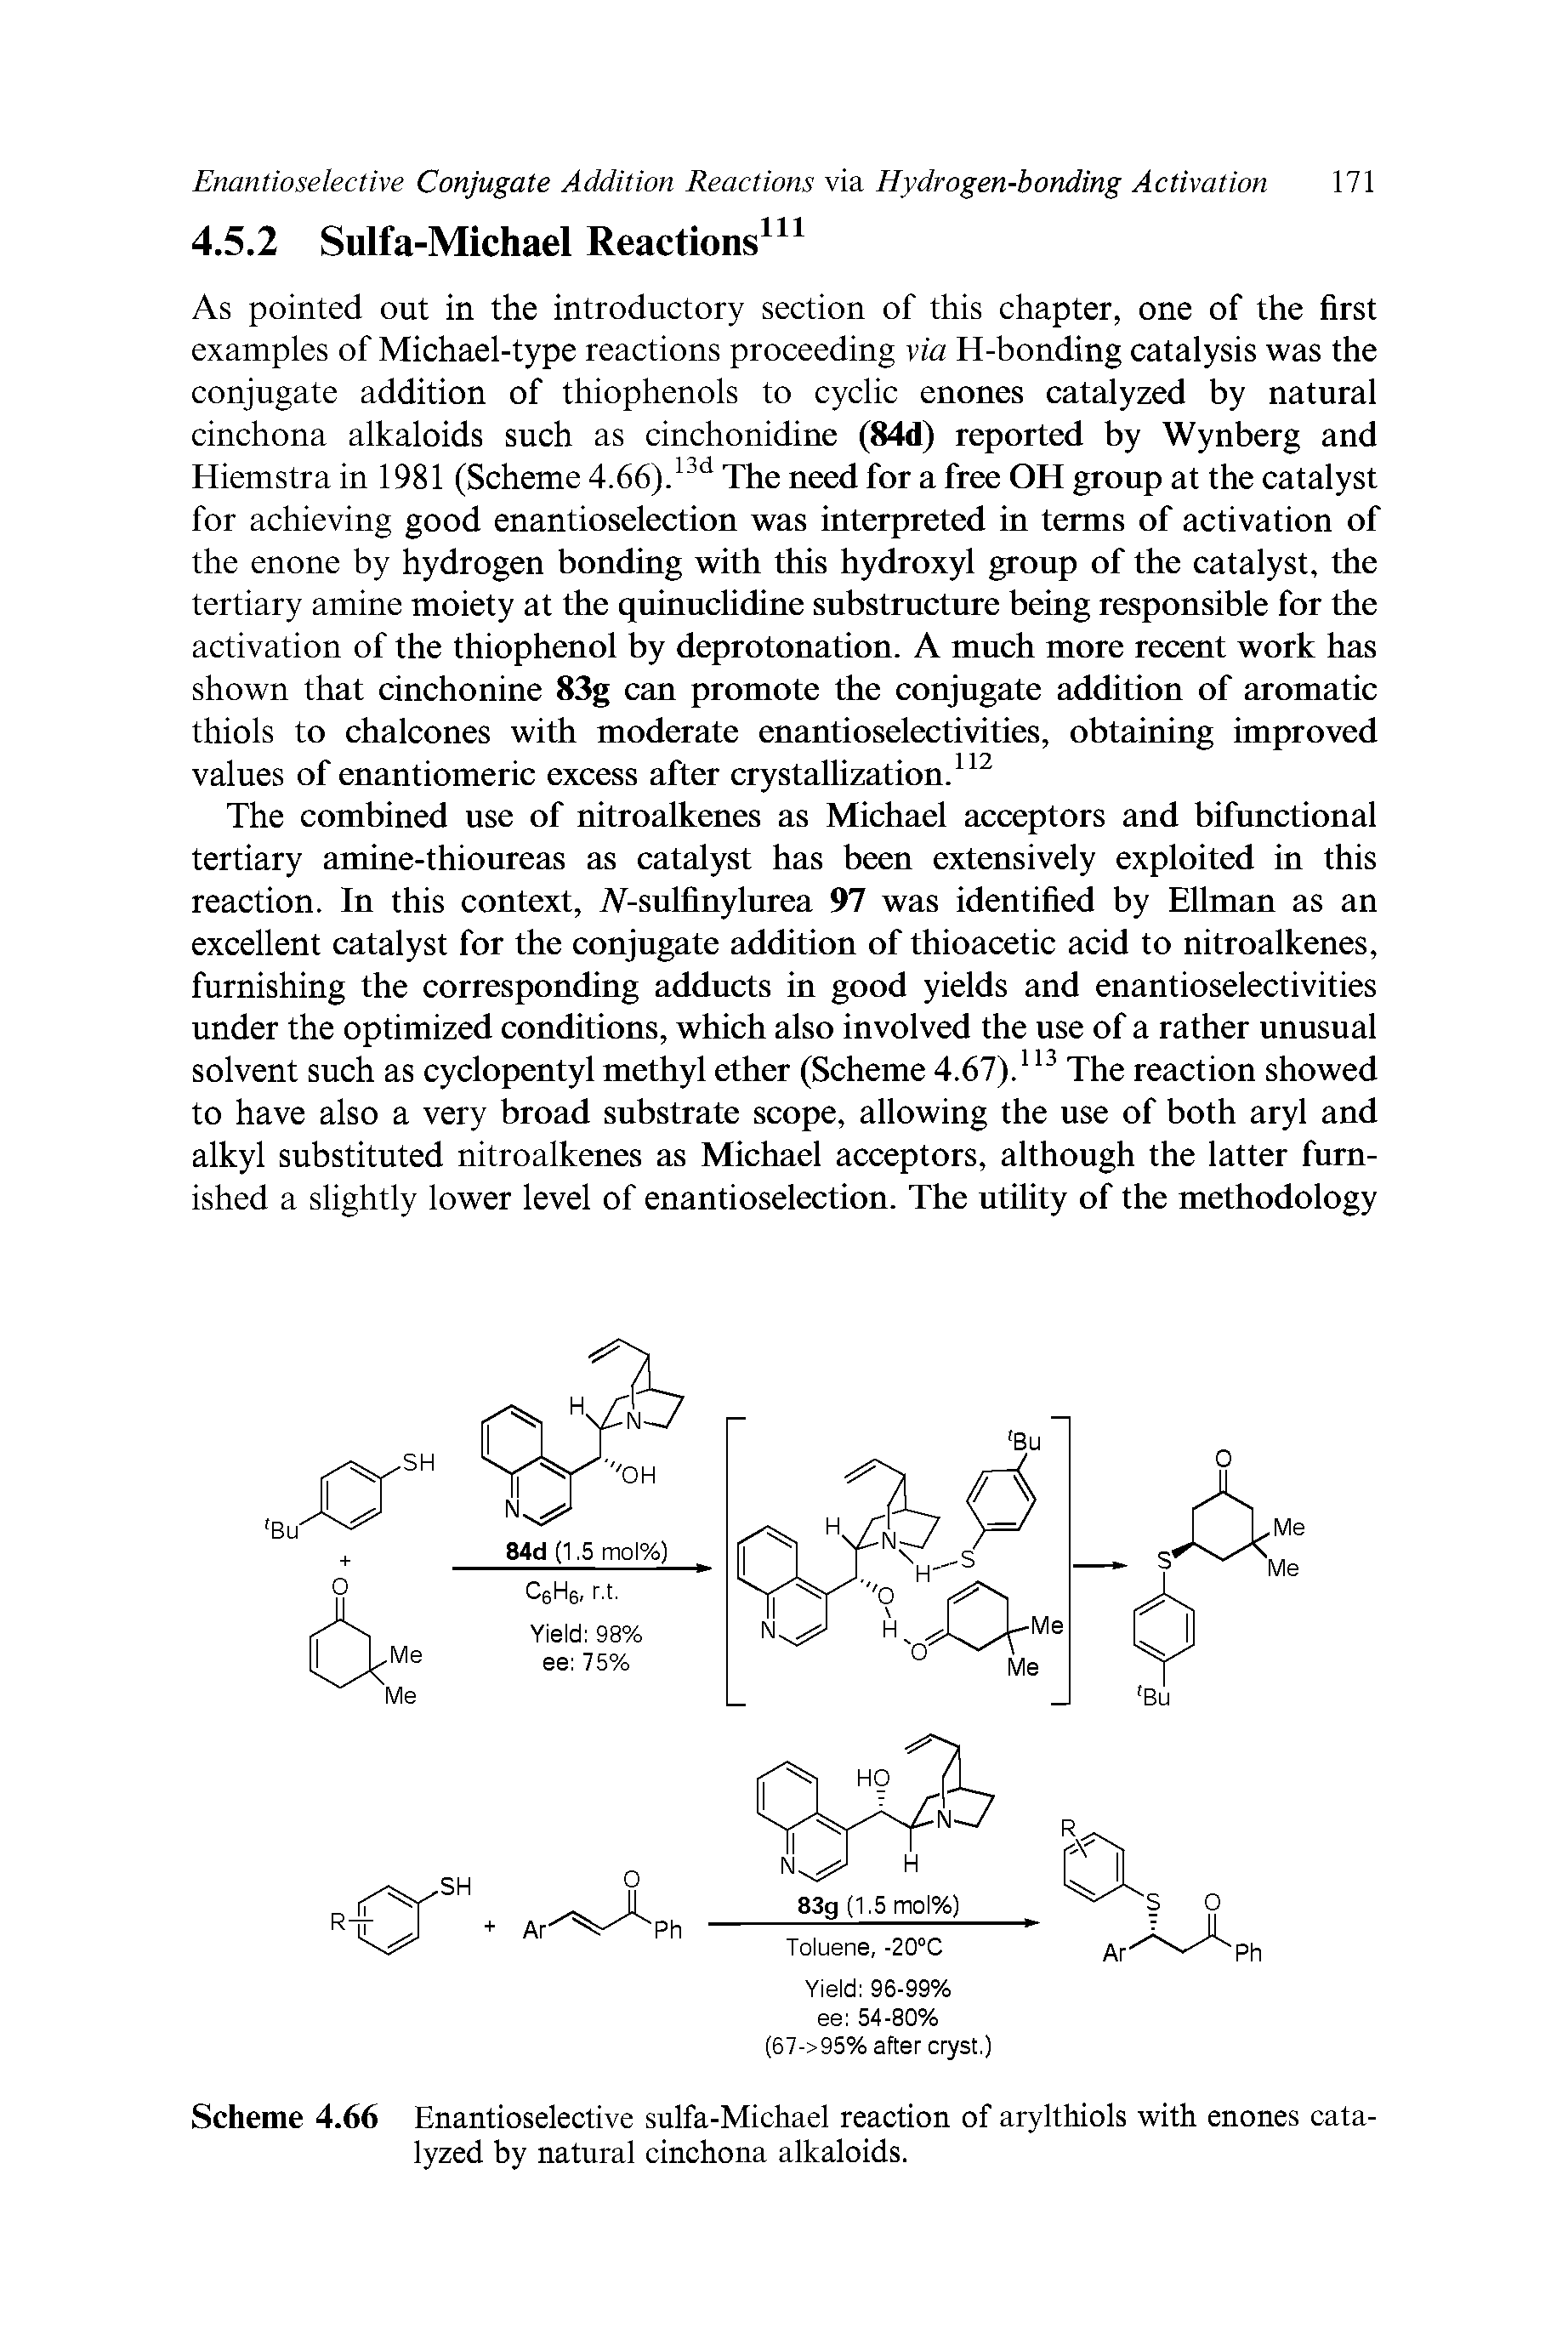 Scheme 4.66 Enantioselective sulfa-Michael reaction of arylthiols with enones catalyzed by natural cinchona alkaloids.